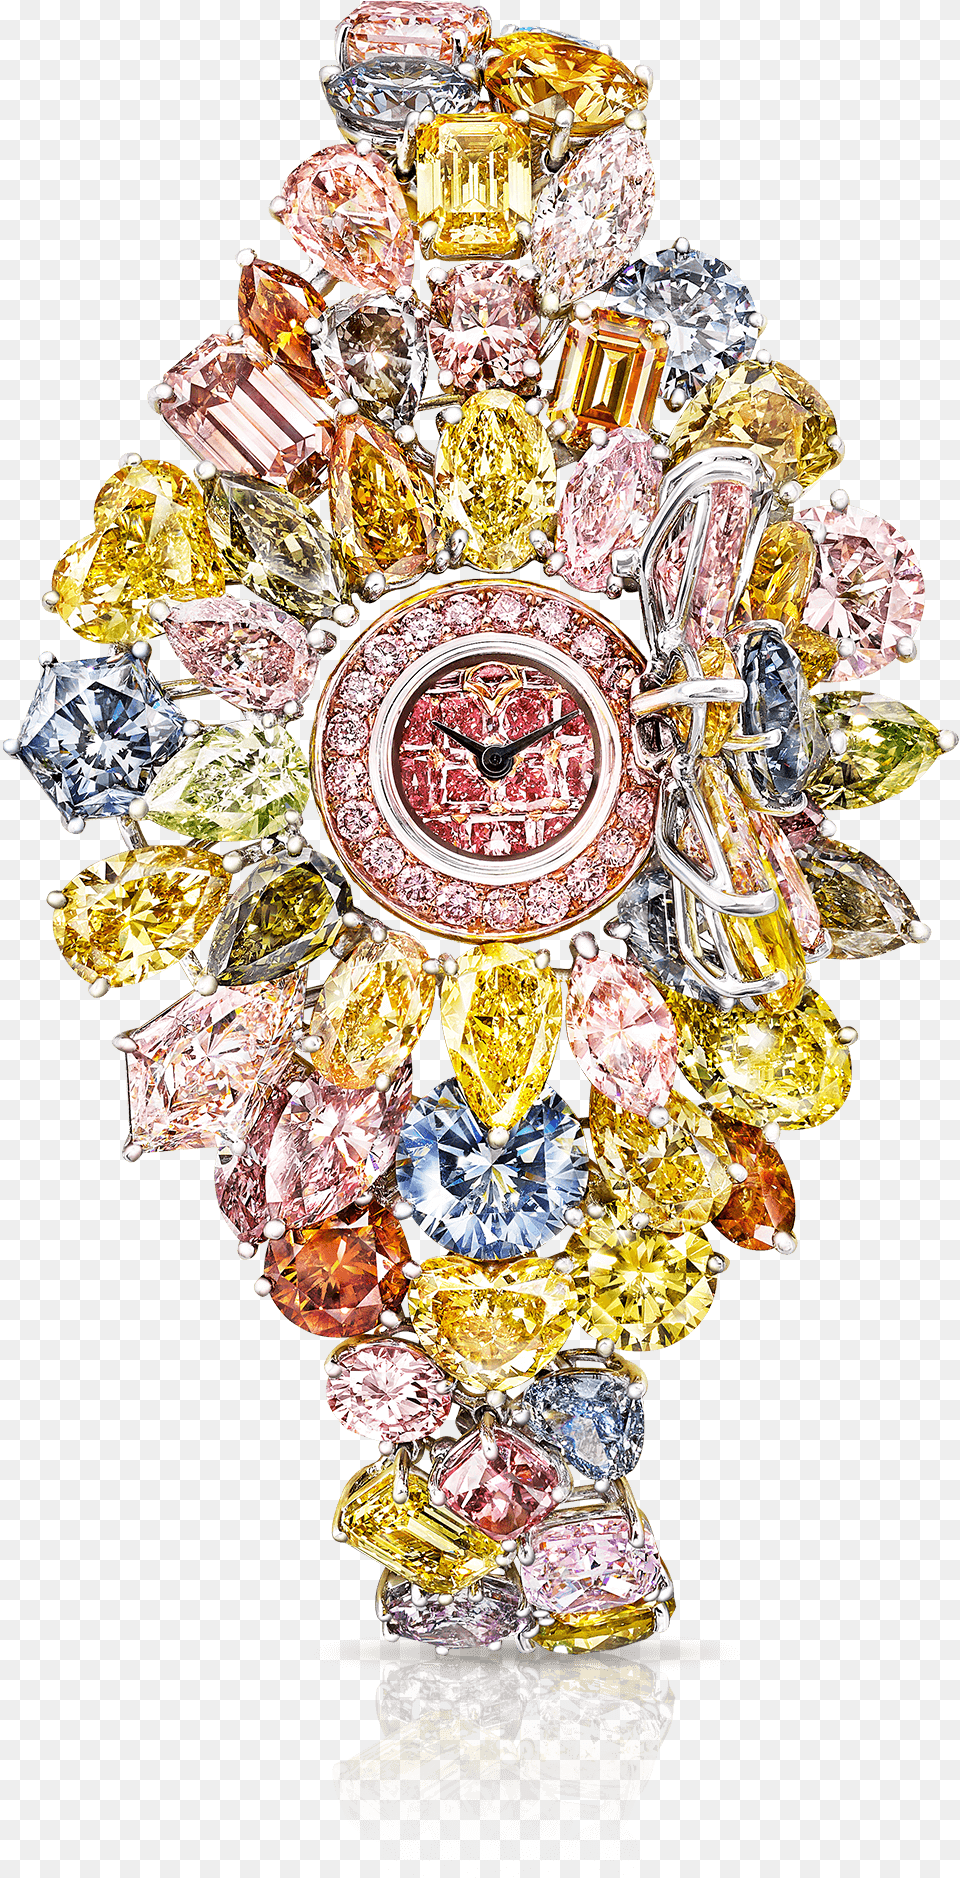 Unique Timepieces Coloured Diamond Watch, Accessories, Gemstone, Jewelry, Brooch Png Image